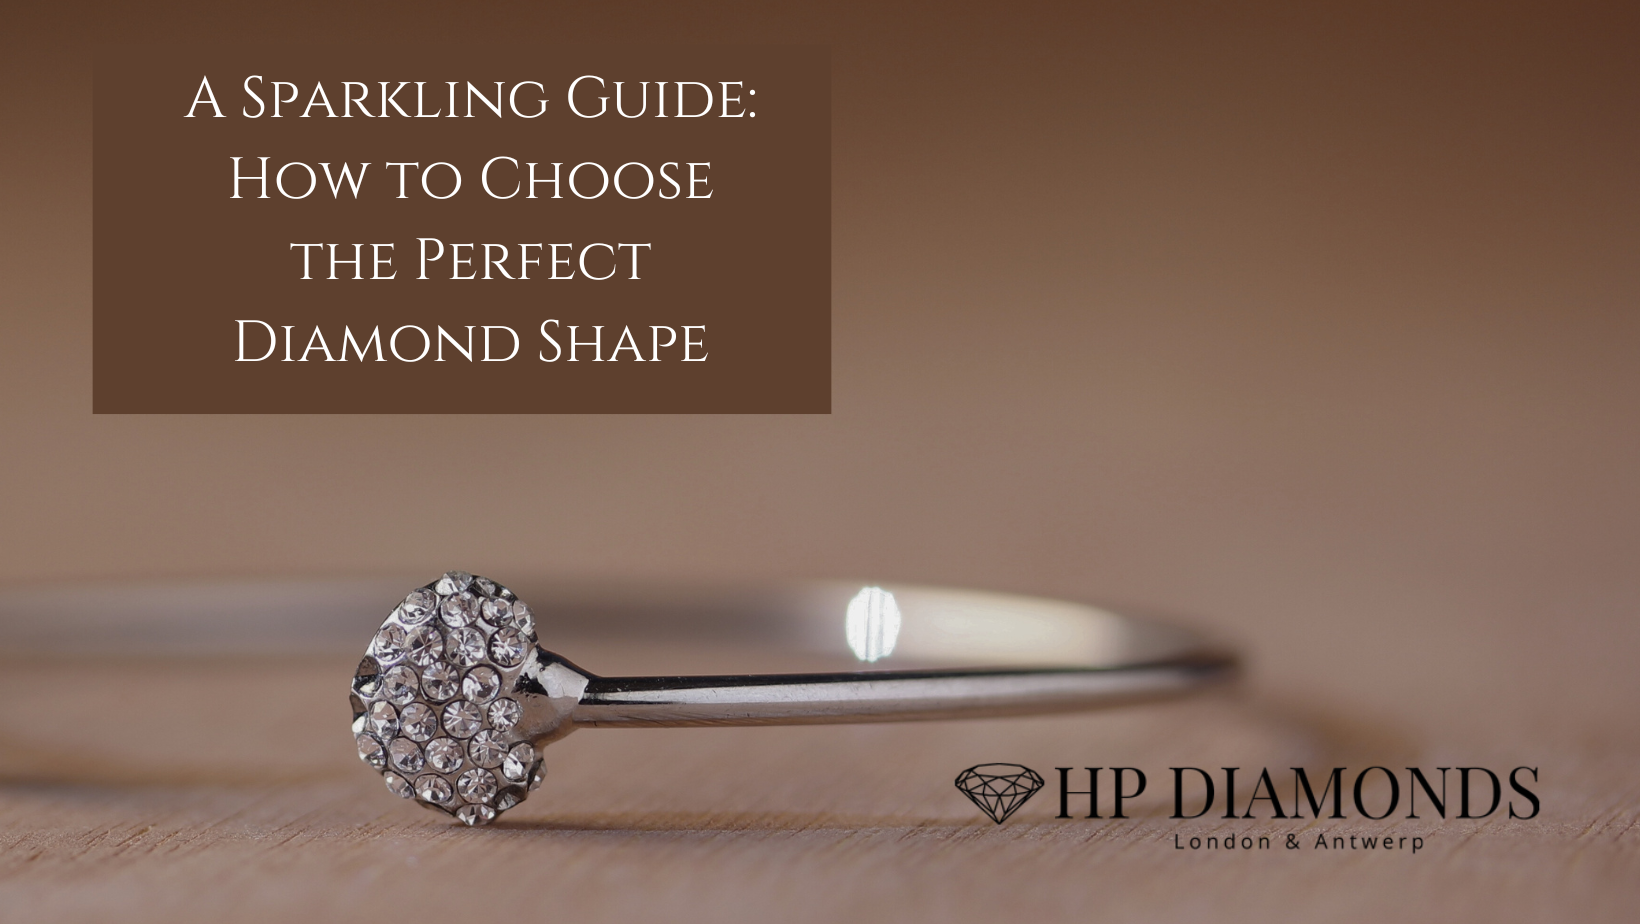 Diamonds are not only symbols of love and commitment but also exquisite expressions of individuality and style. One of the most crucial decisions when purchasing a diamond is selecting the right shape. From classic round brilliants to fancy shapes like princess cuts and emeralds, each diamond shape possesses its own unique charm and characteristics. Here’s a comprehensive guide to help you navigate through the dazzling array of diamond shapes and choose the perfect one for you. 1. Understand Your Preferences: Before diving into the technical details, take some time to explore your personal preferences. Consider your style, personality, and the overall aesthetic you desire. Are you drawn to timeless elegance, modern sophistication, or vintage allure? Understanding your preferences will guide you towards the diamond shape that best reflects your individuality. 2. Explore Diamond Shapes: Familiarize yourself with the various diamond shapes available in the market. Some of the most popular options include: - Round Brilliant: Classic and timeless, known for exceptional brilliance and fire. - Princess Cut: Square or rectangular shape with sharp corners, offering contemporary elegance. - Emerald Cut: Rectangular shape with step-cut facets, prized for its sleek and sophisticated appearance. - Oval Cut: Elongated shape with brilliant faceting, creating a flattering and elongating effect on the finger. - Marquise Cut: Boat-shaped with pointed ends, renowned for its unique and eye-catching silhouette. - Pear Cut: Combination of round and marquise shapes, featuring a teardrop outline that exudes elegance and grace. - Cushion Cut: Square or rectangular shape with rounded corners, offering vintage-inspired charm and romantic appeal. - Asscher Cut: Square shape with step-cut facets, reminiscent of Art Deco glamour and architectural sophistication. - Old Cut: Old cut diamonds have a very individual appearance, with fewer facets they tend to sparkle less, yet have a unique appeal. 3. Consider Finger Shape and Size: Different diamond shapes complement various finger shapes and sizes. For example, elongated shapes like ovals and marquises tend to flatter shorter fingers by creating the illusion of length. Conversely, round and princess cuts are versatile options that suit most finger shapes and sizes. Consider trying on different shapes to see how they look on your hand and choose the one that feels most flattering and comfortable. 4. Evaluate Sparkle and Brilliance: Each diamond shape interacts with light differently, resulting in varying levels of sparkle and brilliance. Round brilliants are renowned for their unparalleled sparkle and fire, making them an excellent choice for those seeking maximum brilliance. Fancy shapes like princess cuts and emeralds may exhibit a different play of light, with broader flashes of brilliance or a more subdued glow. Consider your preference for sparkle and choose a diamond shape that aligns with your desired level of brilliance. 5. Reflect on Lifestyle and Practicality: Your lifestyle and daily activities should also influence your choice of diamond shape. If you lead an active lifestyle or work with your hands frequently, you may prefer a low-profile shape like a princess cut or a bezel-set round brilliant that offers greater durability and security. On the other hand, if you prioritize aesthetics and are willing to take extra precautions to protect your diamond, you might opt for a more delicate shape like a pear or marquise cut. 6. Set a Budget: Finally, consider your budget when selecting a diamond shape. While round brilliants are the most popular and widely available shape, they also tend to command a premium due to their exceptional brilliance and popularity. Fancy shapes like princess cuts and ovals may offer a more affordable alternative without compromising on beauty or quality. Set a realistic budget and explore diamond shapes within your price range to find the perfect balance between quality and value. Choosing the perfect diamond shape is a deeply personal and exciting journey that reflects your unique style, preferences, and personality. By considering factors such as your aesthetic preferences, finger shape and size, sparkle and brilliance, lifestyle, and budget, you can confidently select a diamond shape that captures the essence of your love and individuality. Whether you opt for a classic round brilliant or a distinctive fancy shape, your chosen diamond will serve as a timeless symbol of your enduring commitment and affection.